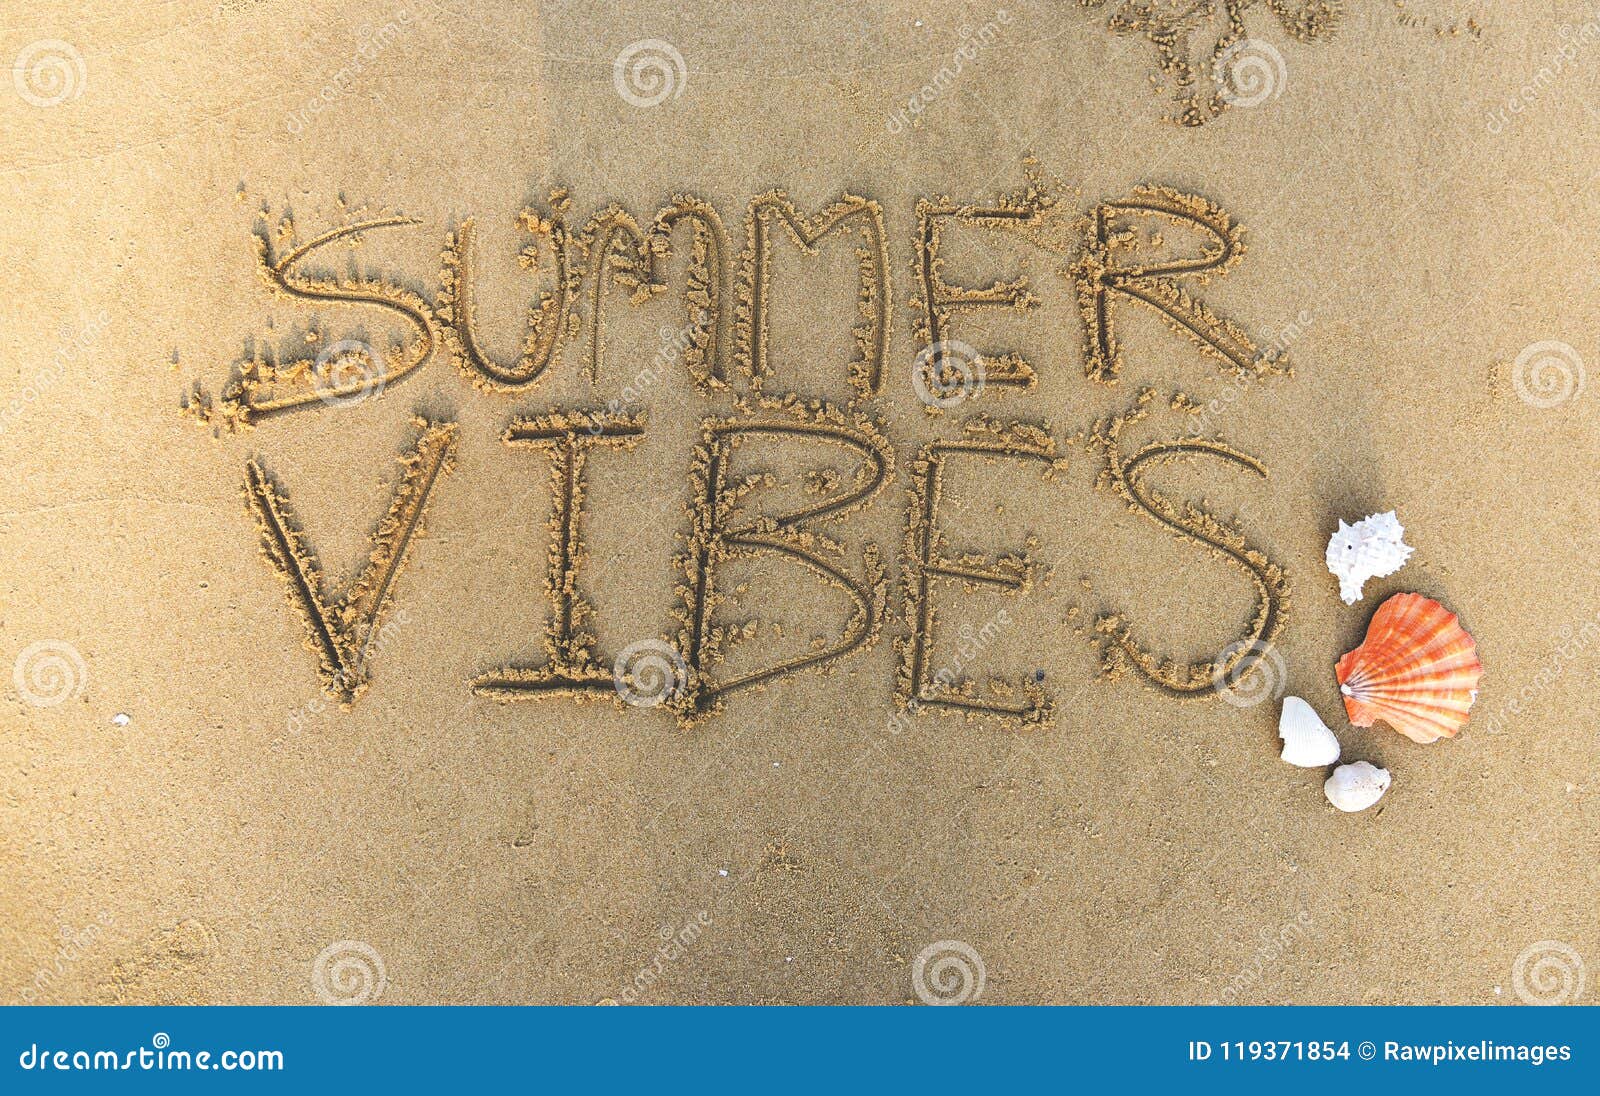 Summer Vibes Written in the Sand Stock Photo - Image of nature